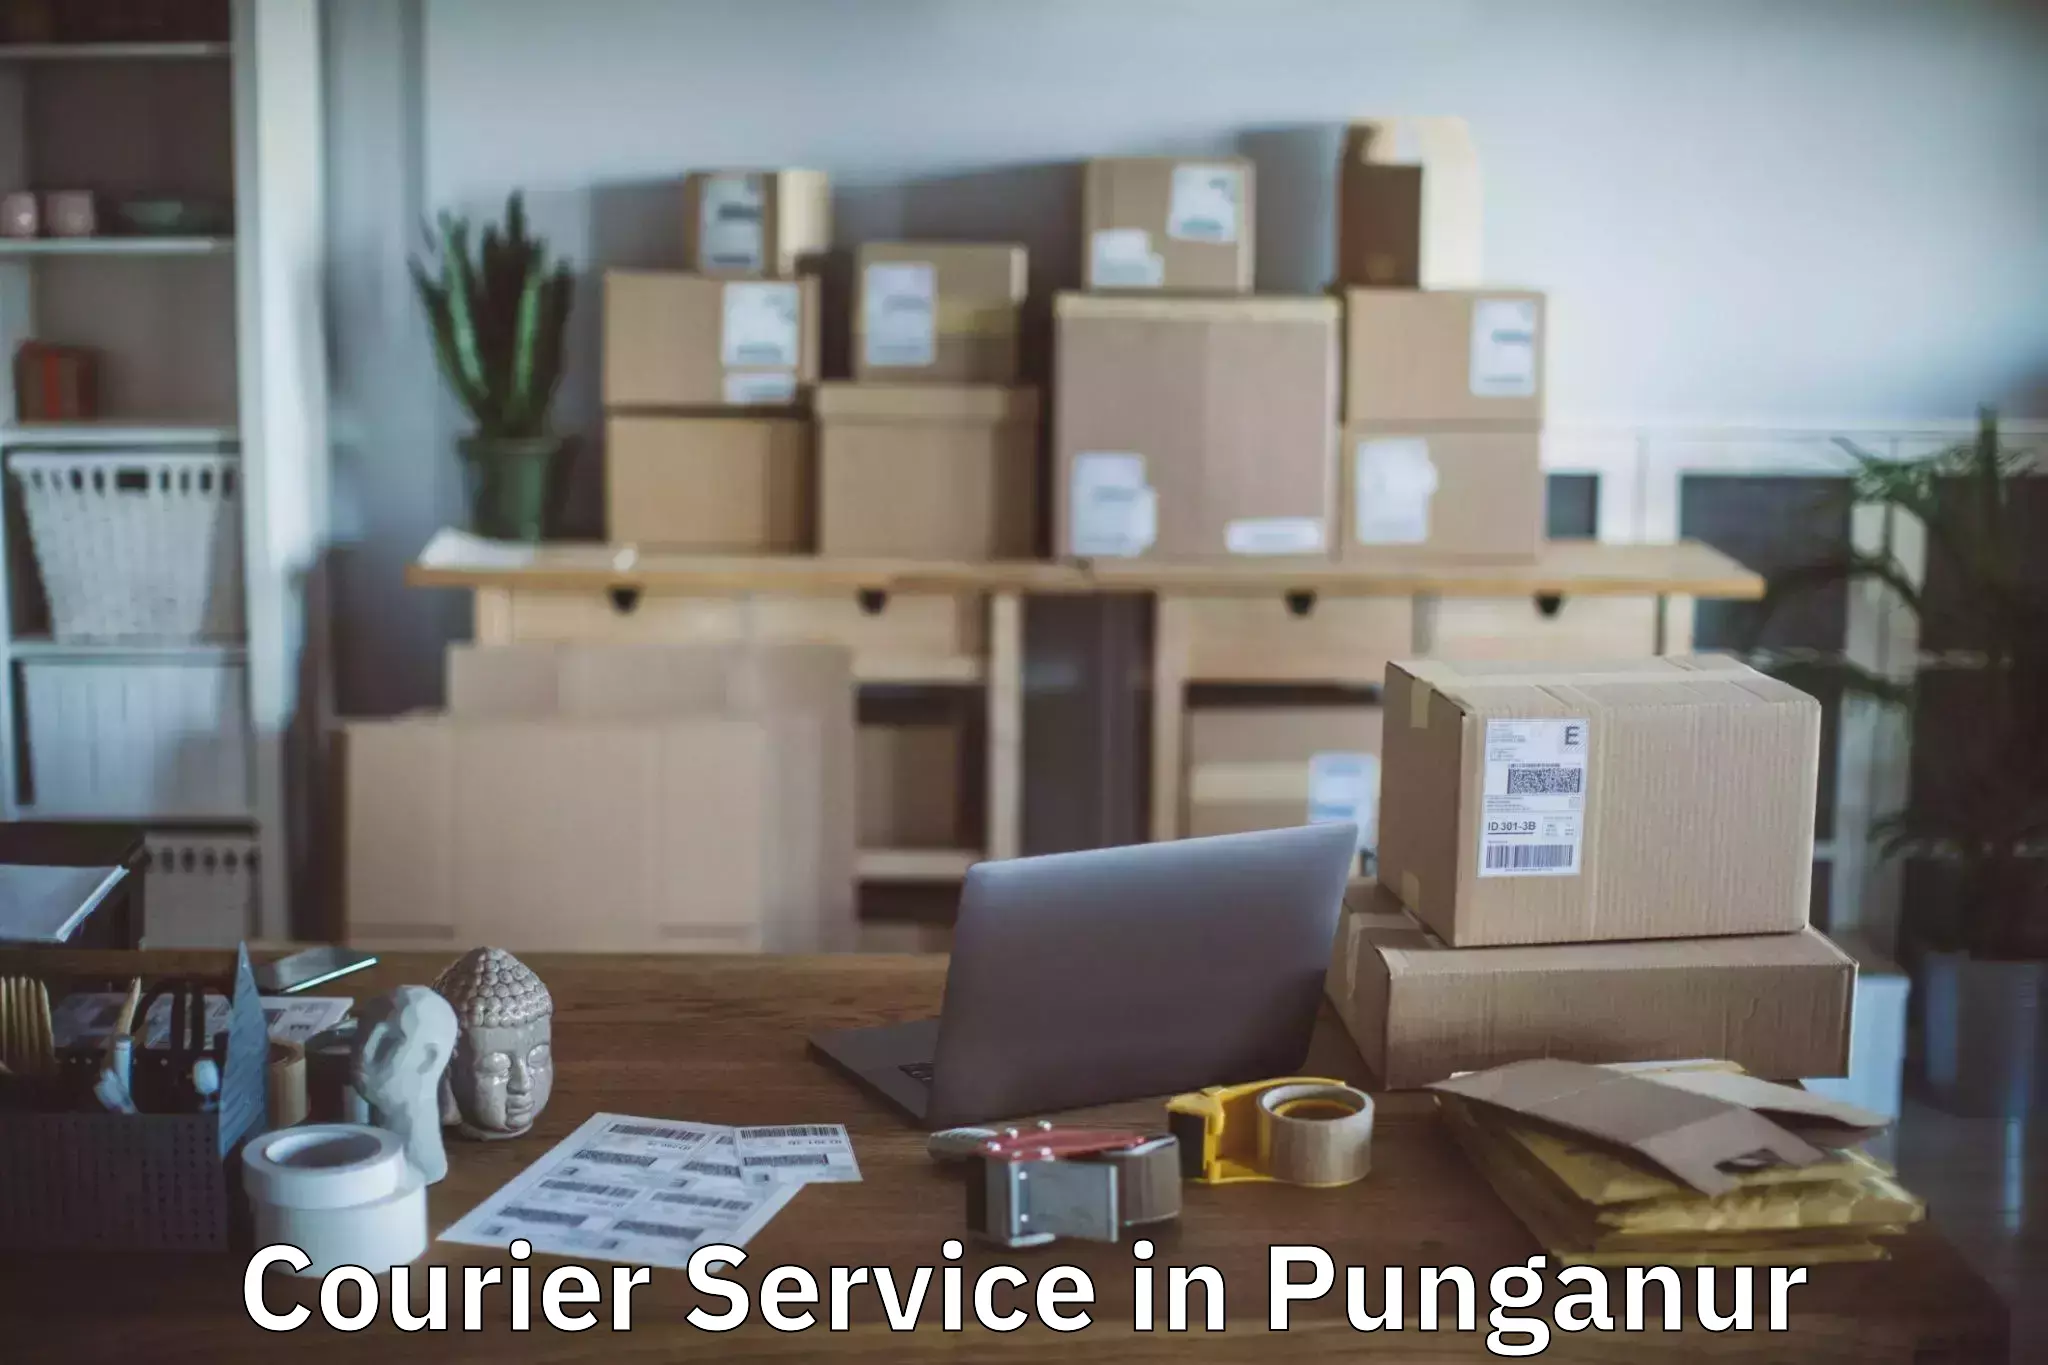 Automated parcel services in Punganur